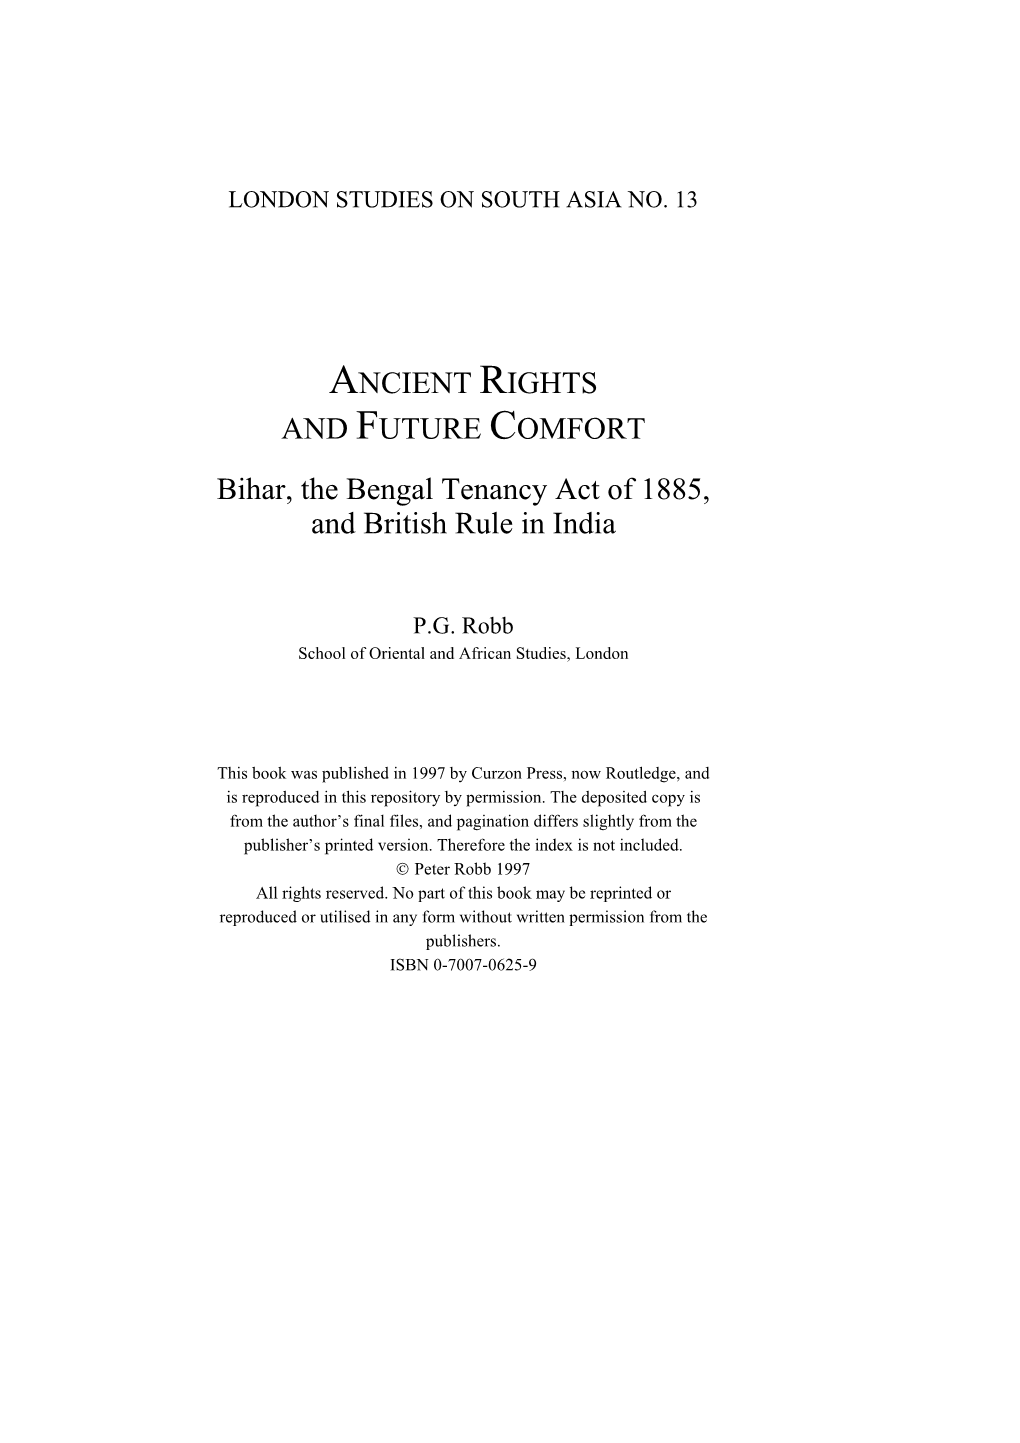 ANCIENT RIGHTS and FUTURE COMFORT Bihar, the Bengal